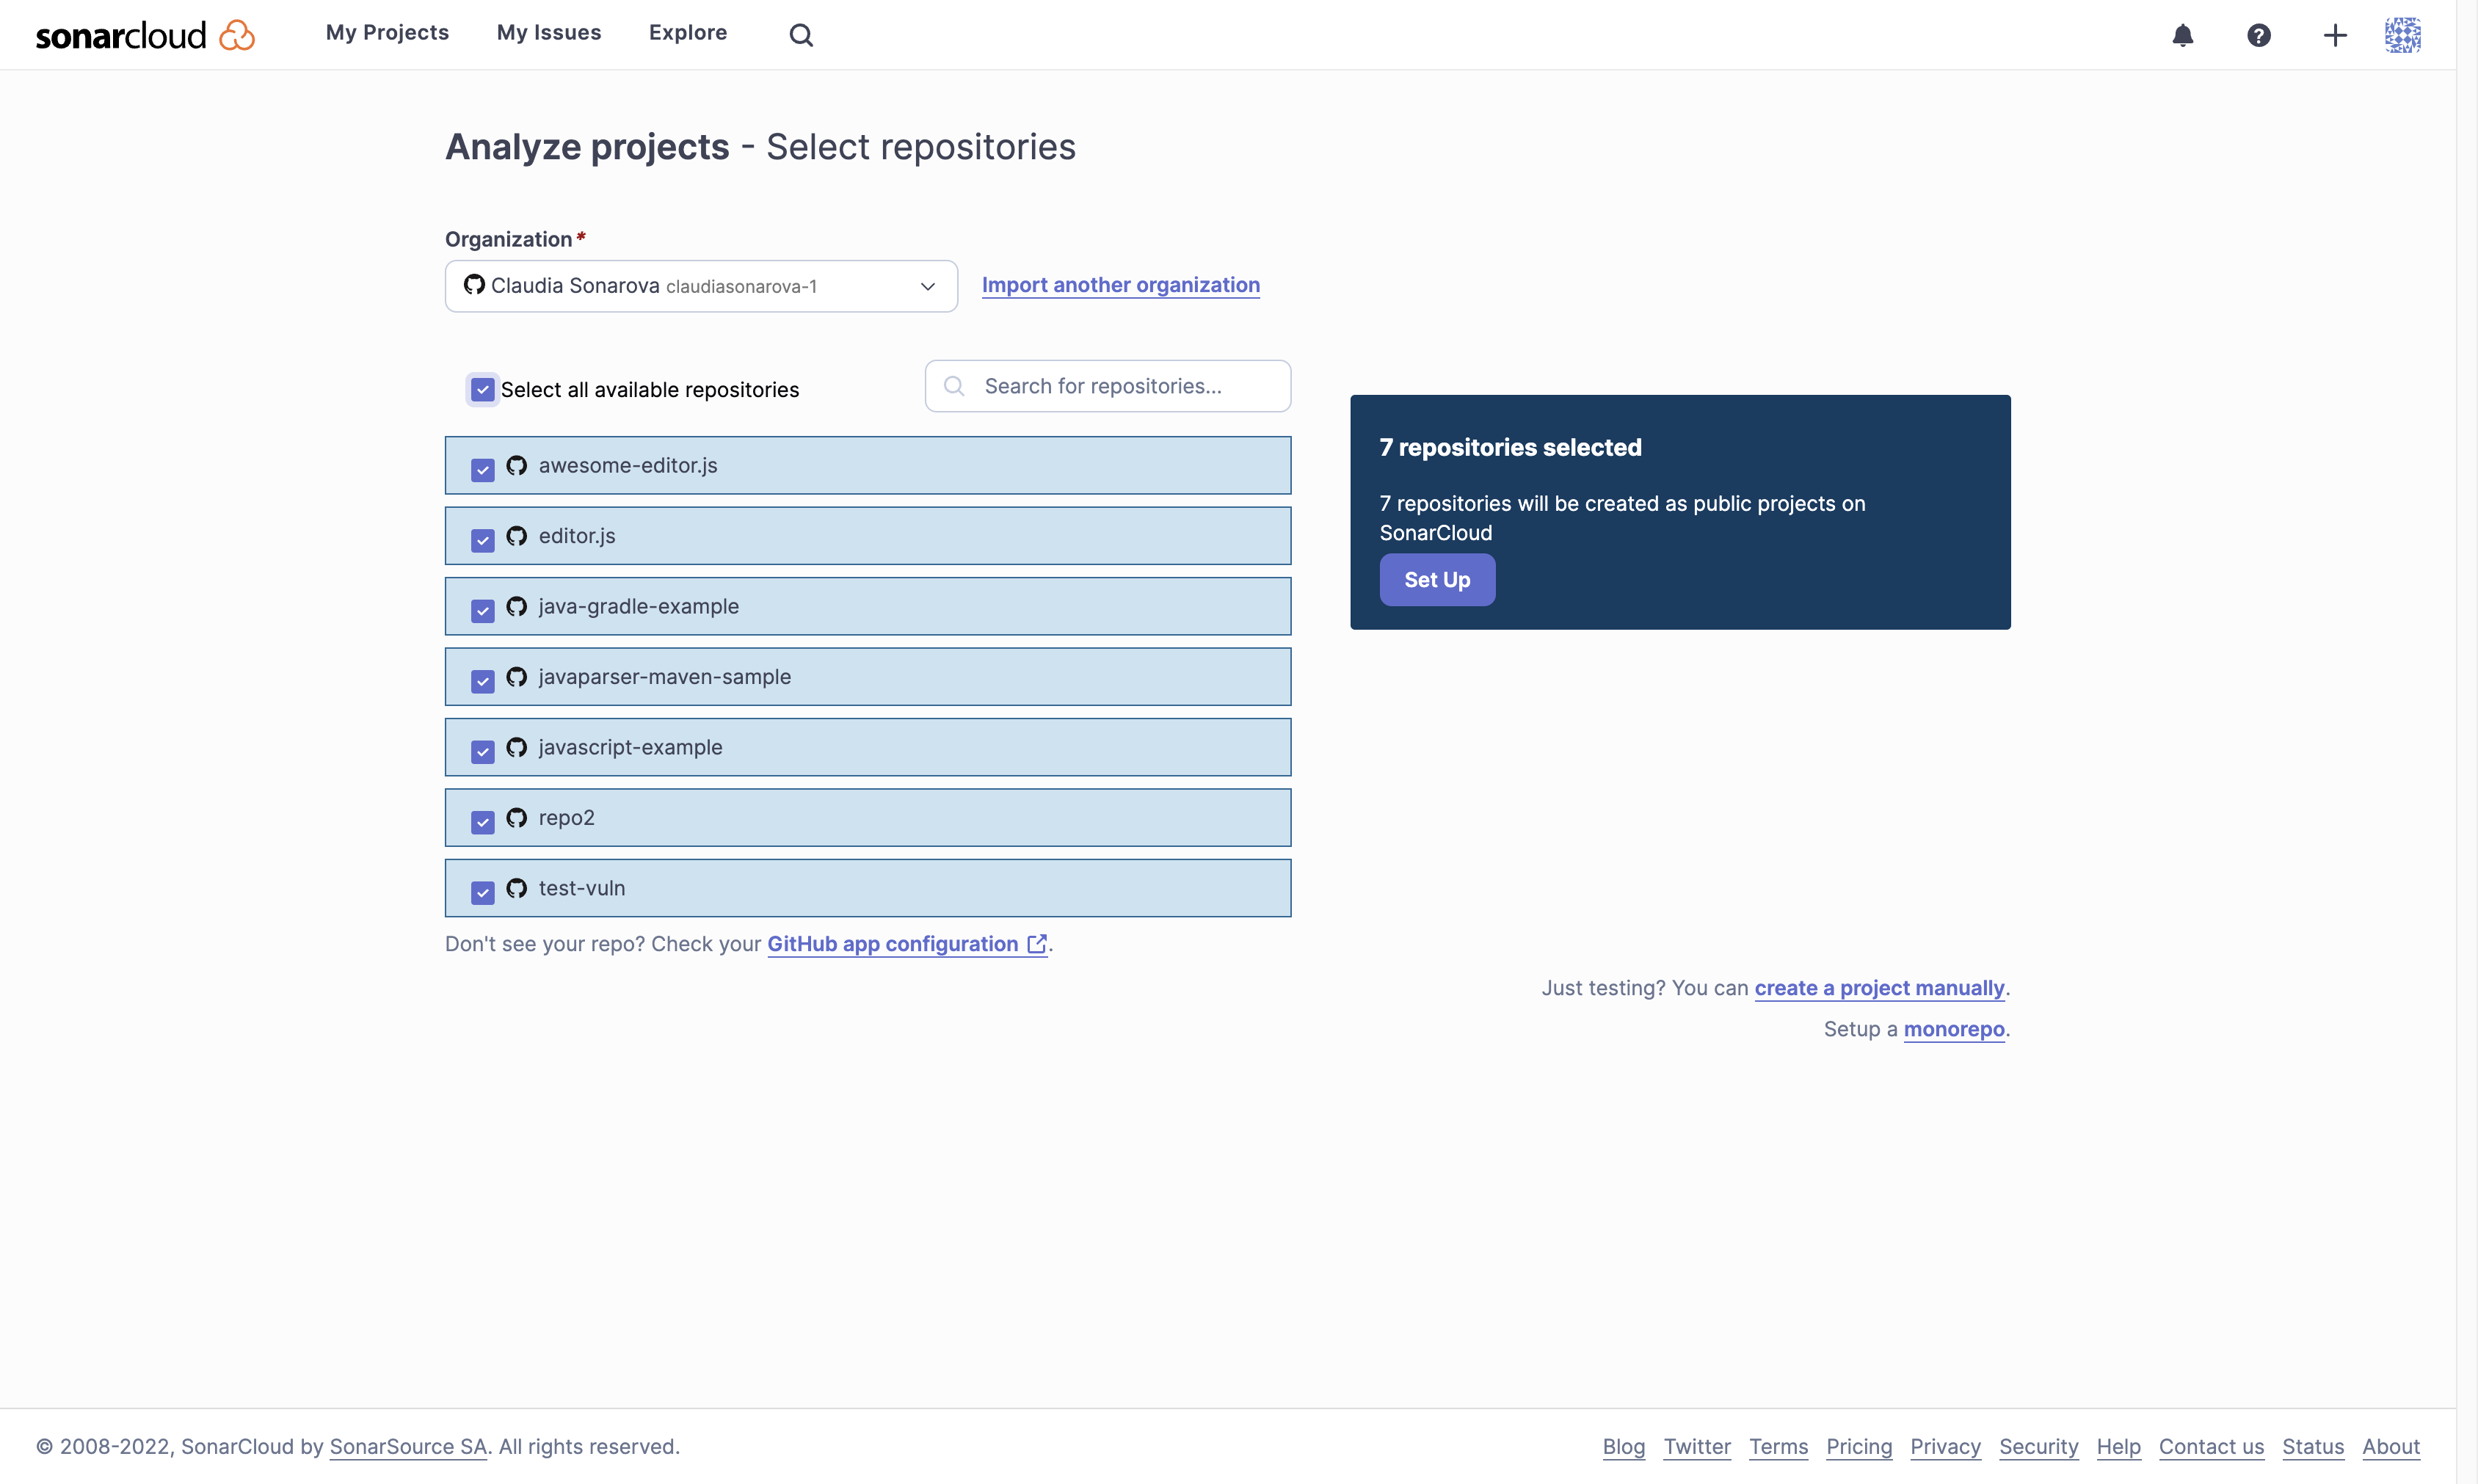 Select the GitHub repositories that you want to analyze with SonarCloud.